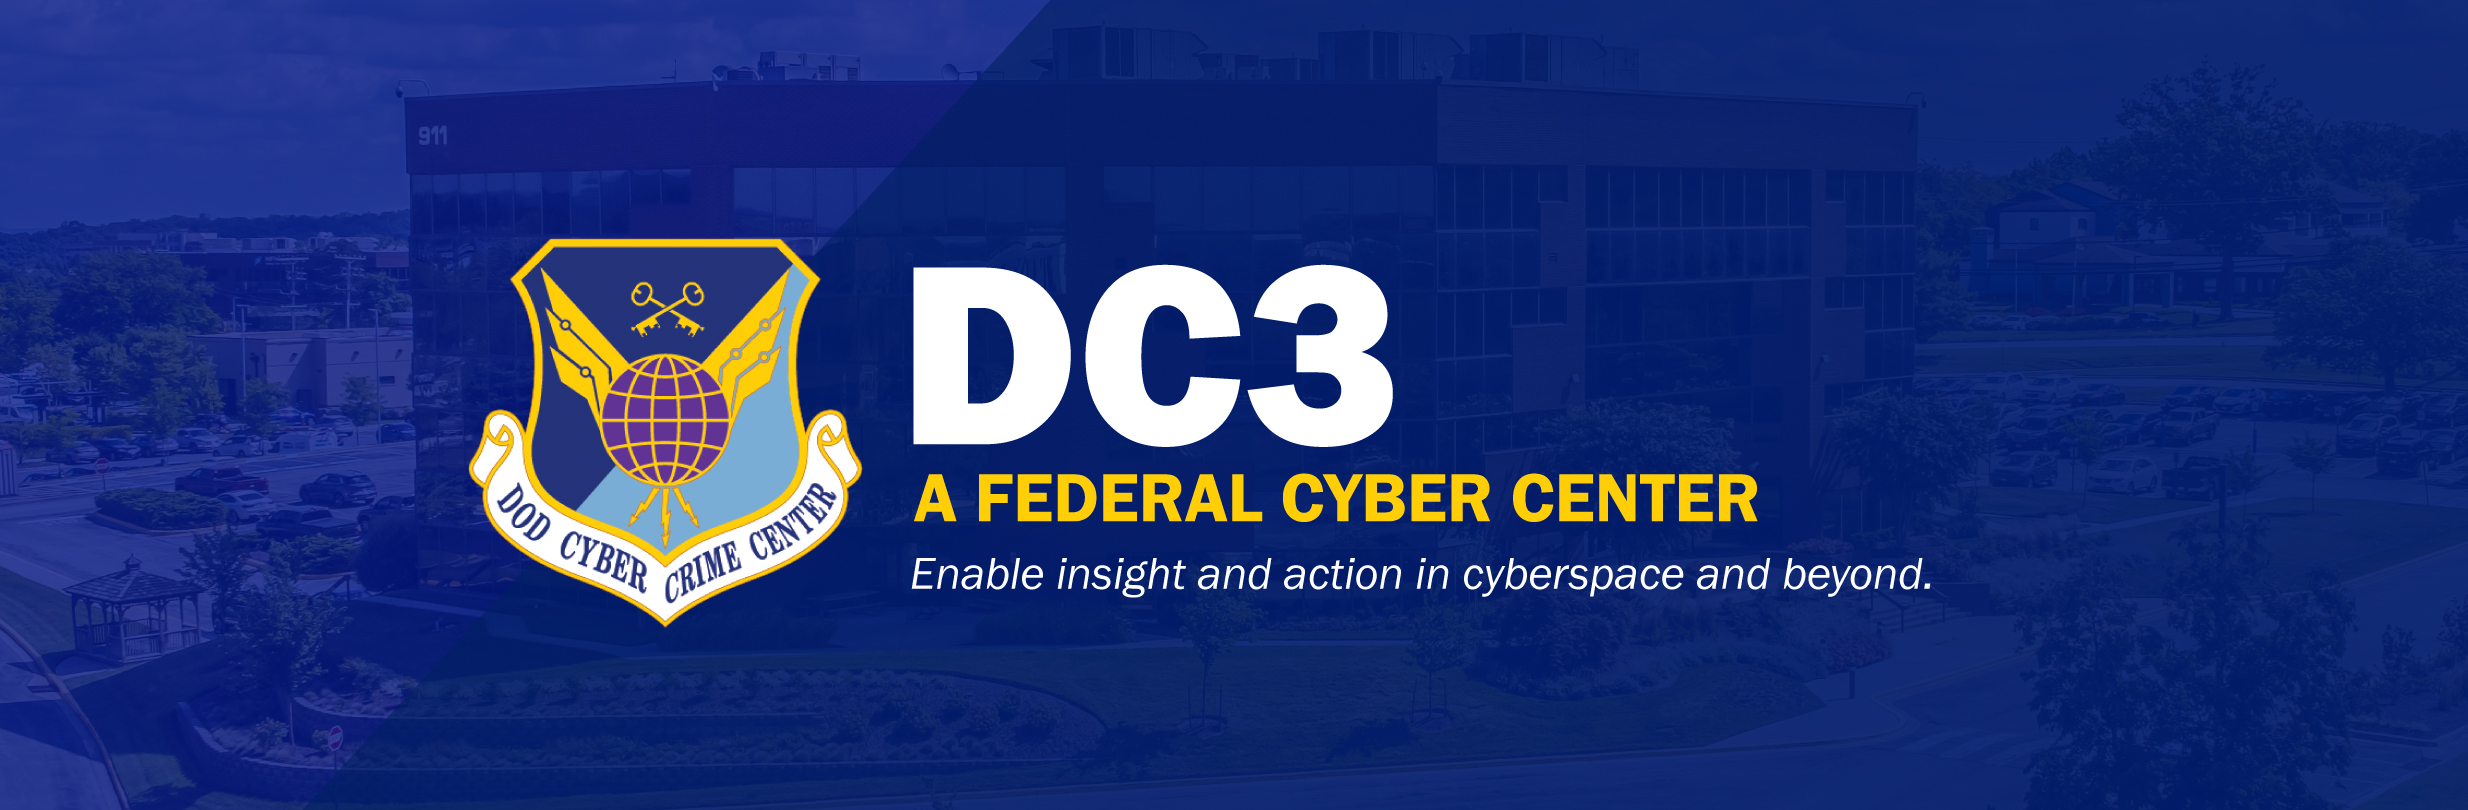 DC3 A Federal Cyber Center. Enable insight and action in cyberspace and beyond.